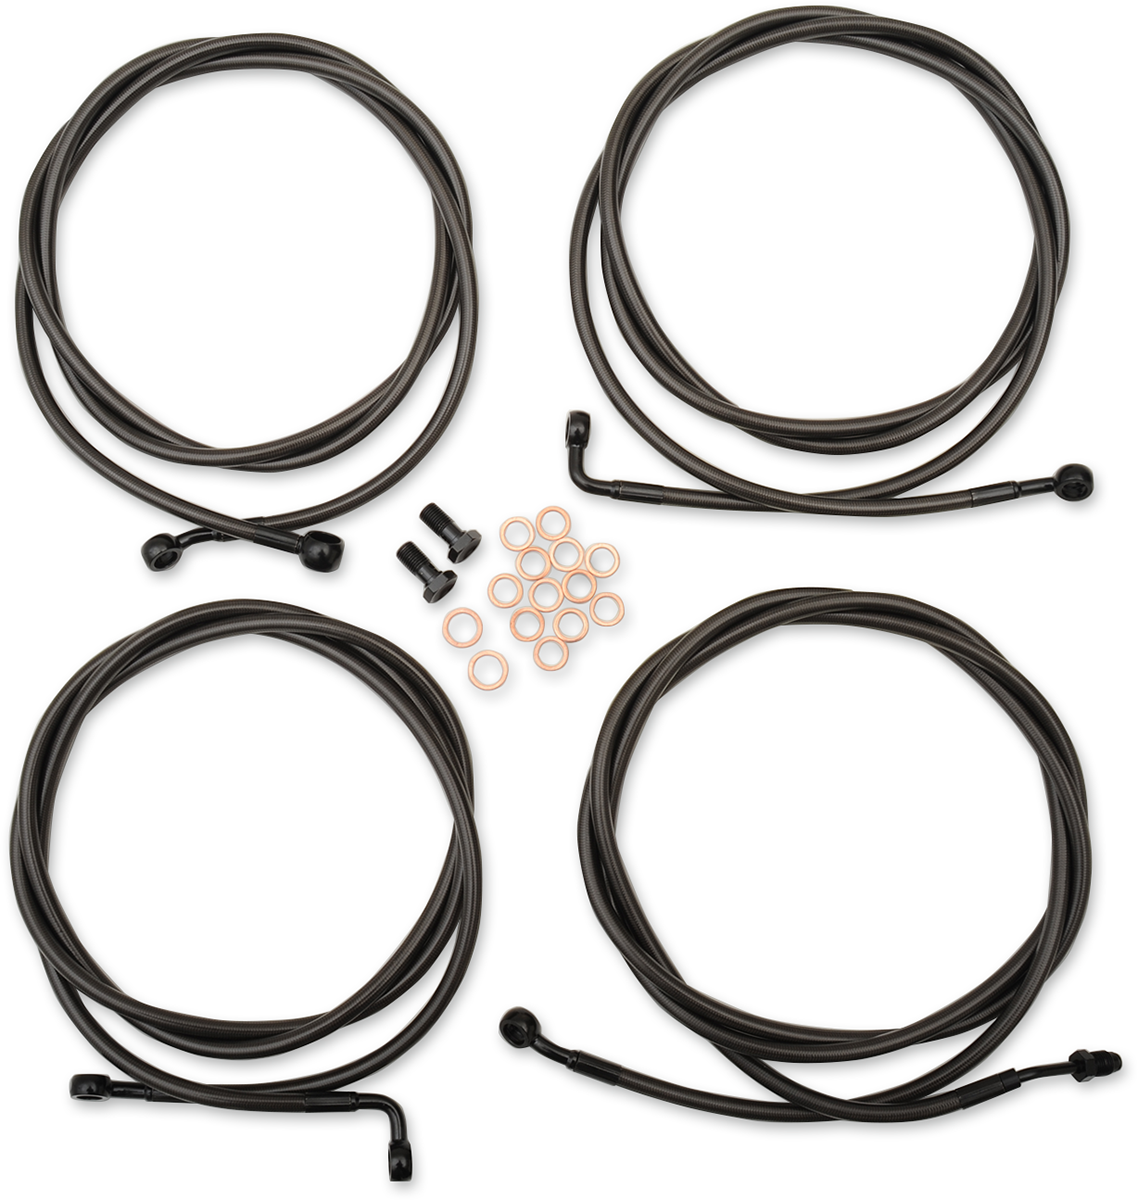 La Choppers Midnight Mini Ape Handlebar ABS Cable Kit for 17-19 Harley Touring